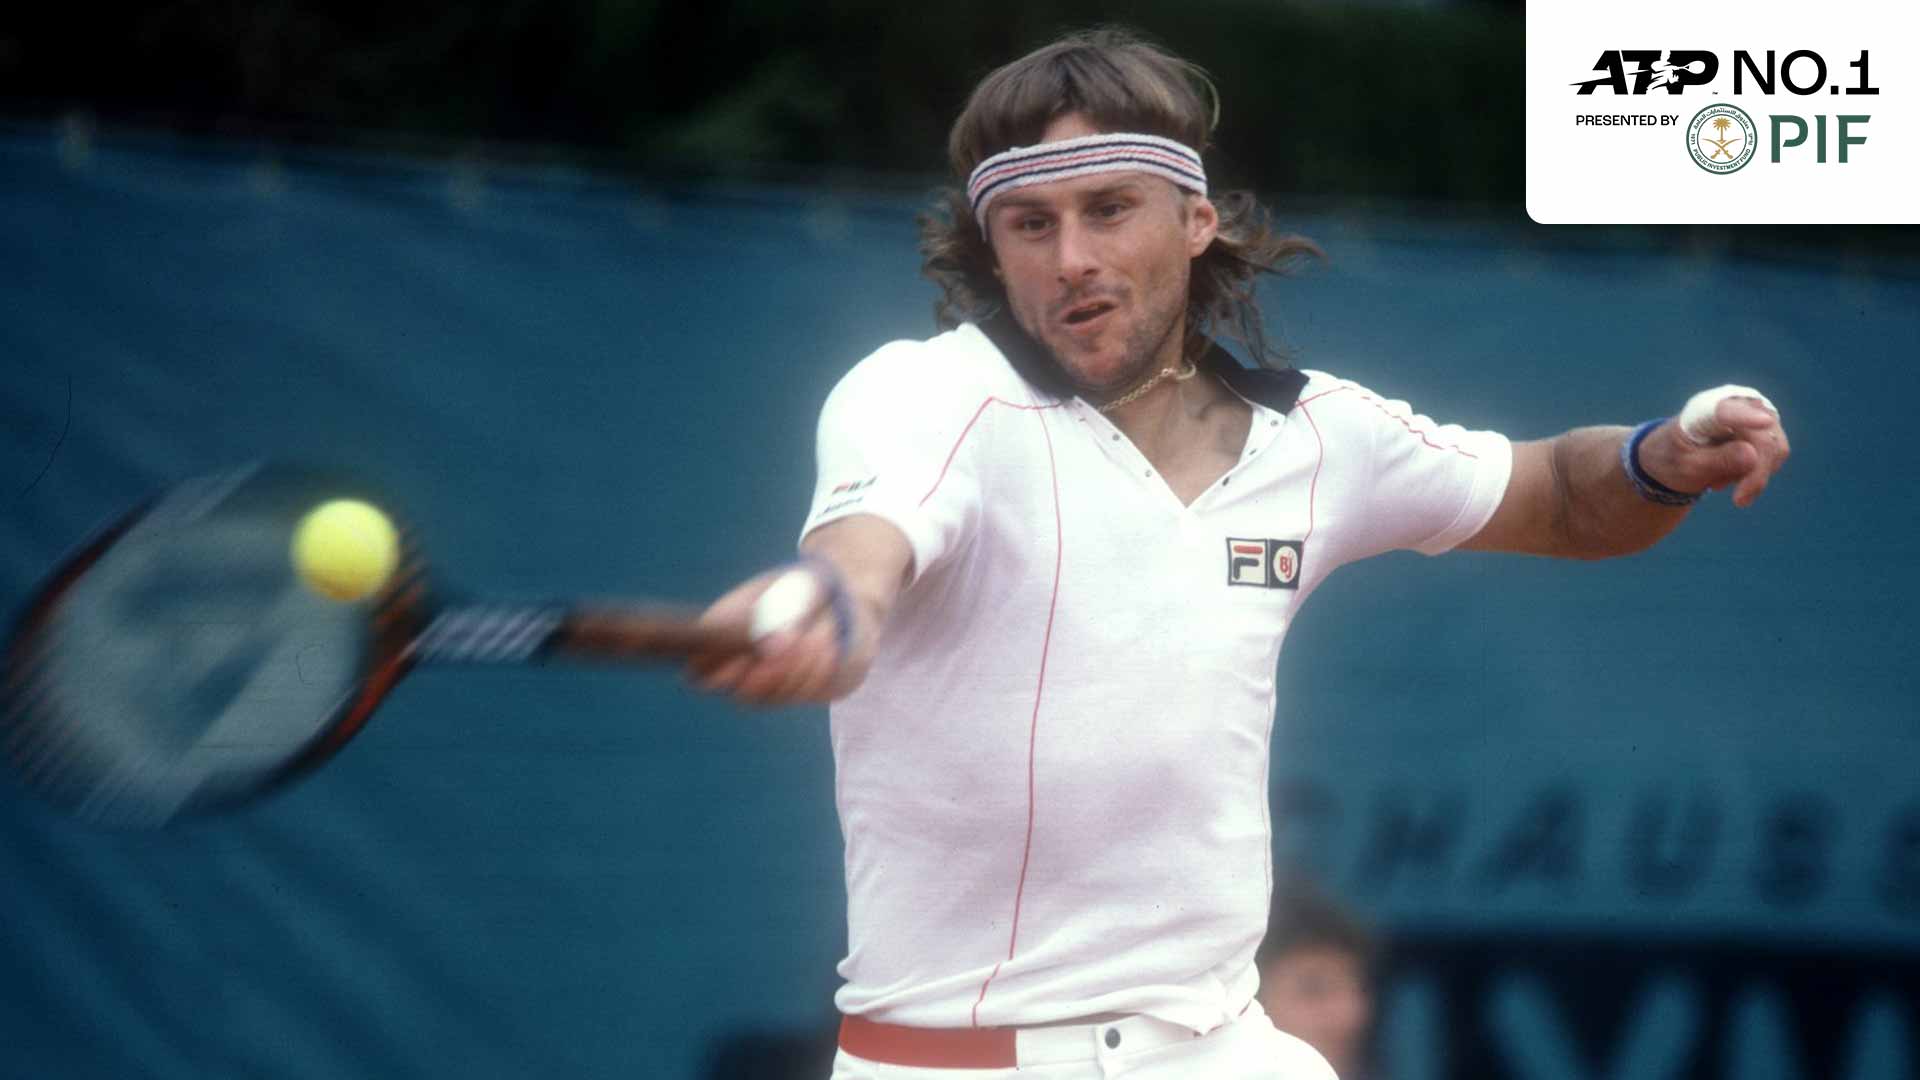 Bjorn Borg in 1980, the same season he finished year-end No. 1 PIF ATP Rankings for a second straight year.